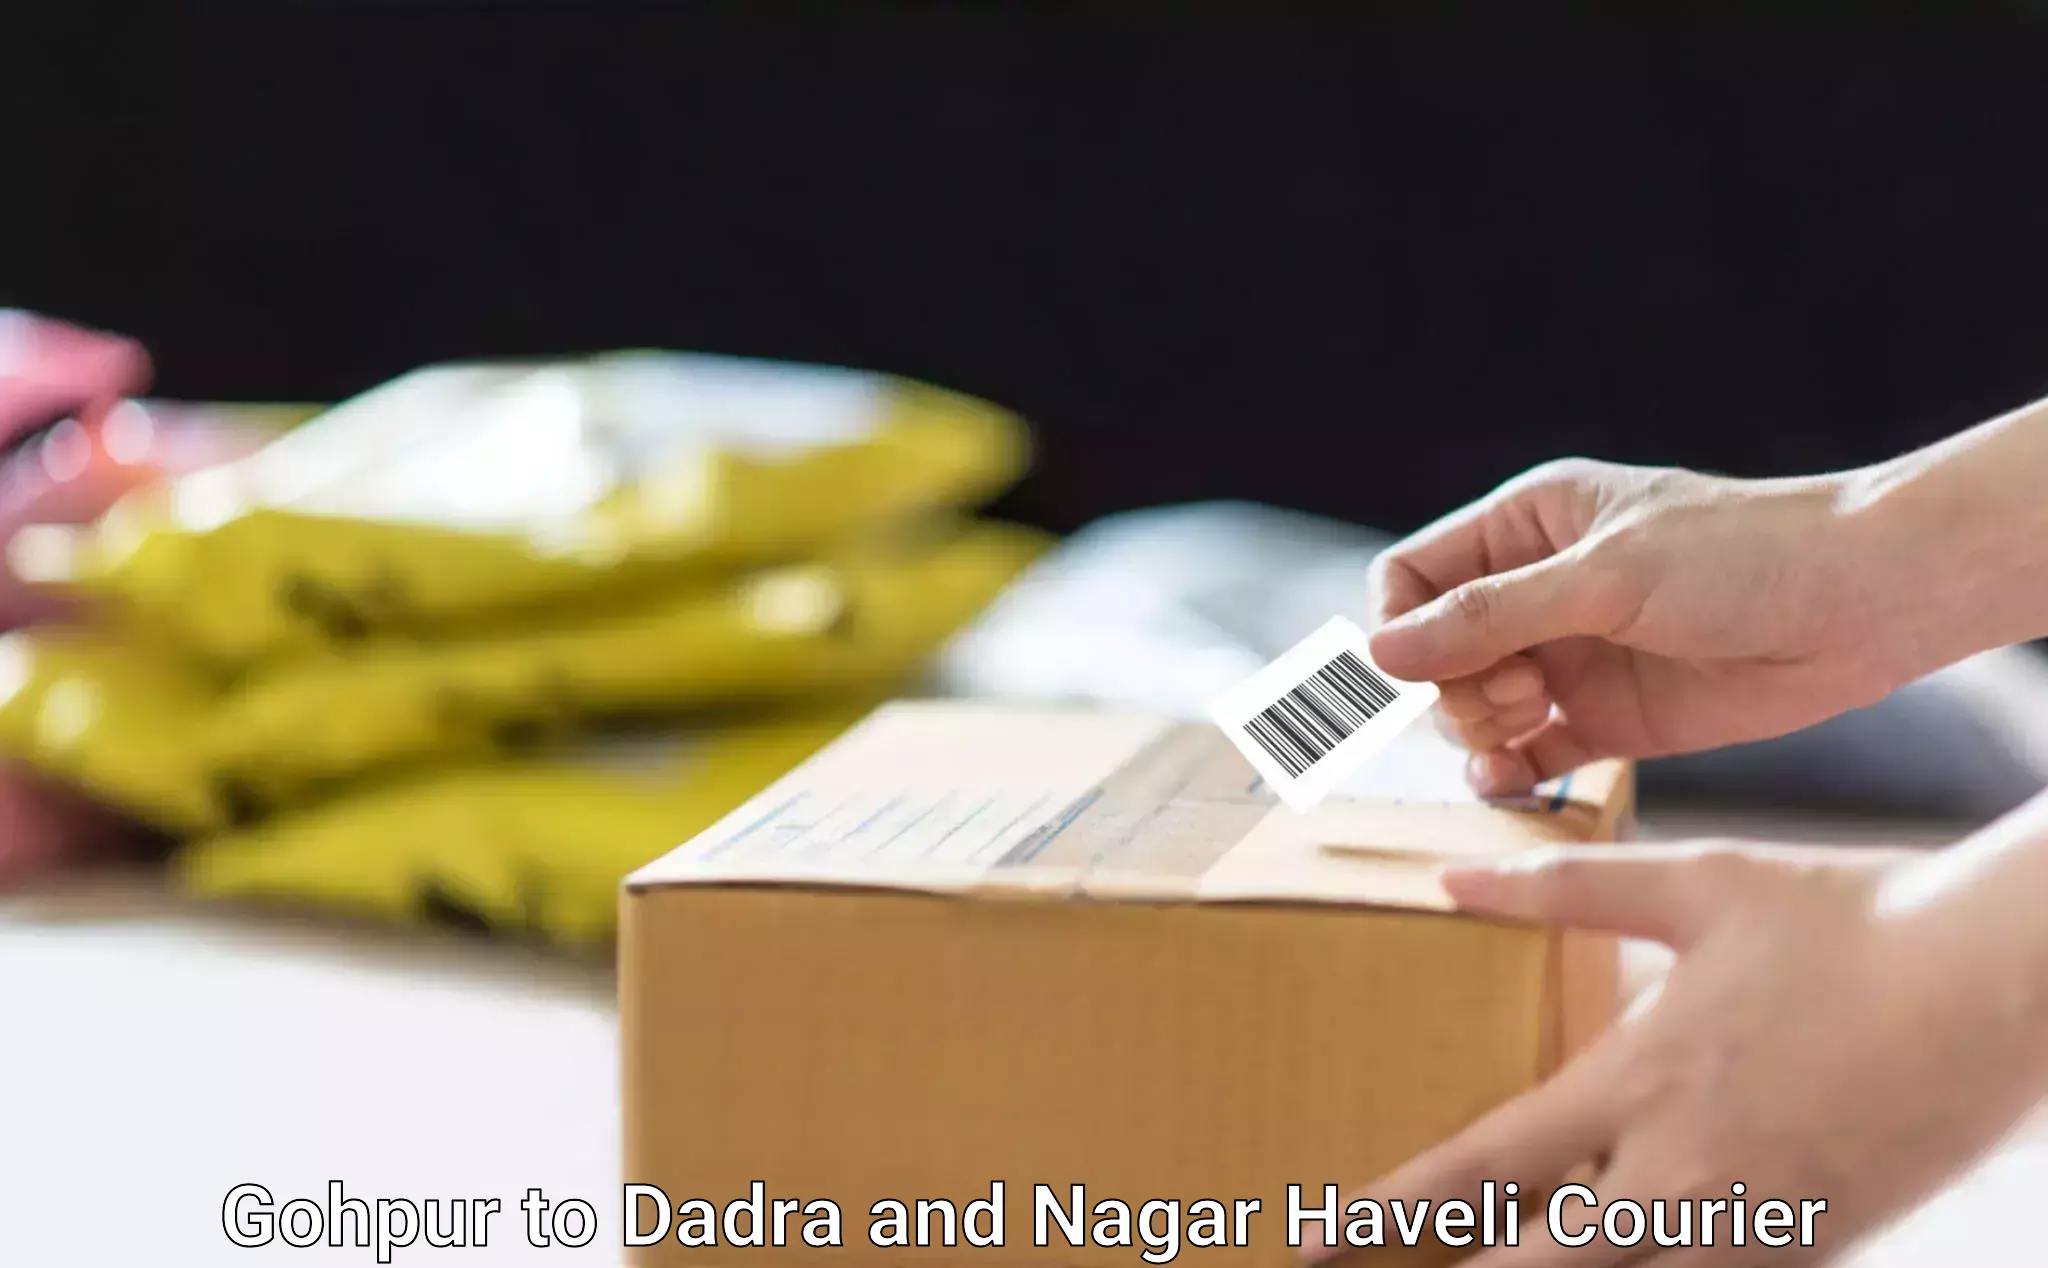 Residential courier service in Gohpur to Dadra and Nagar Haveli